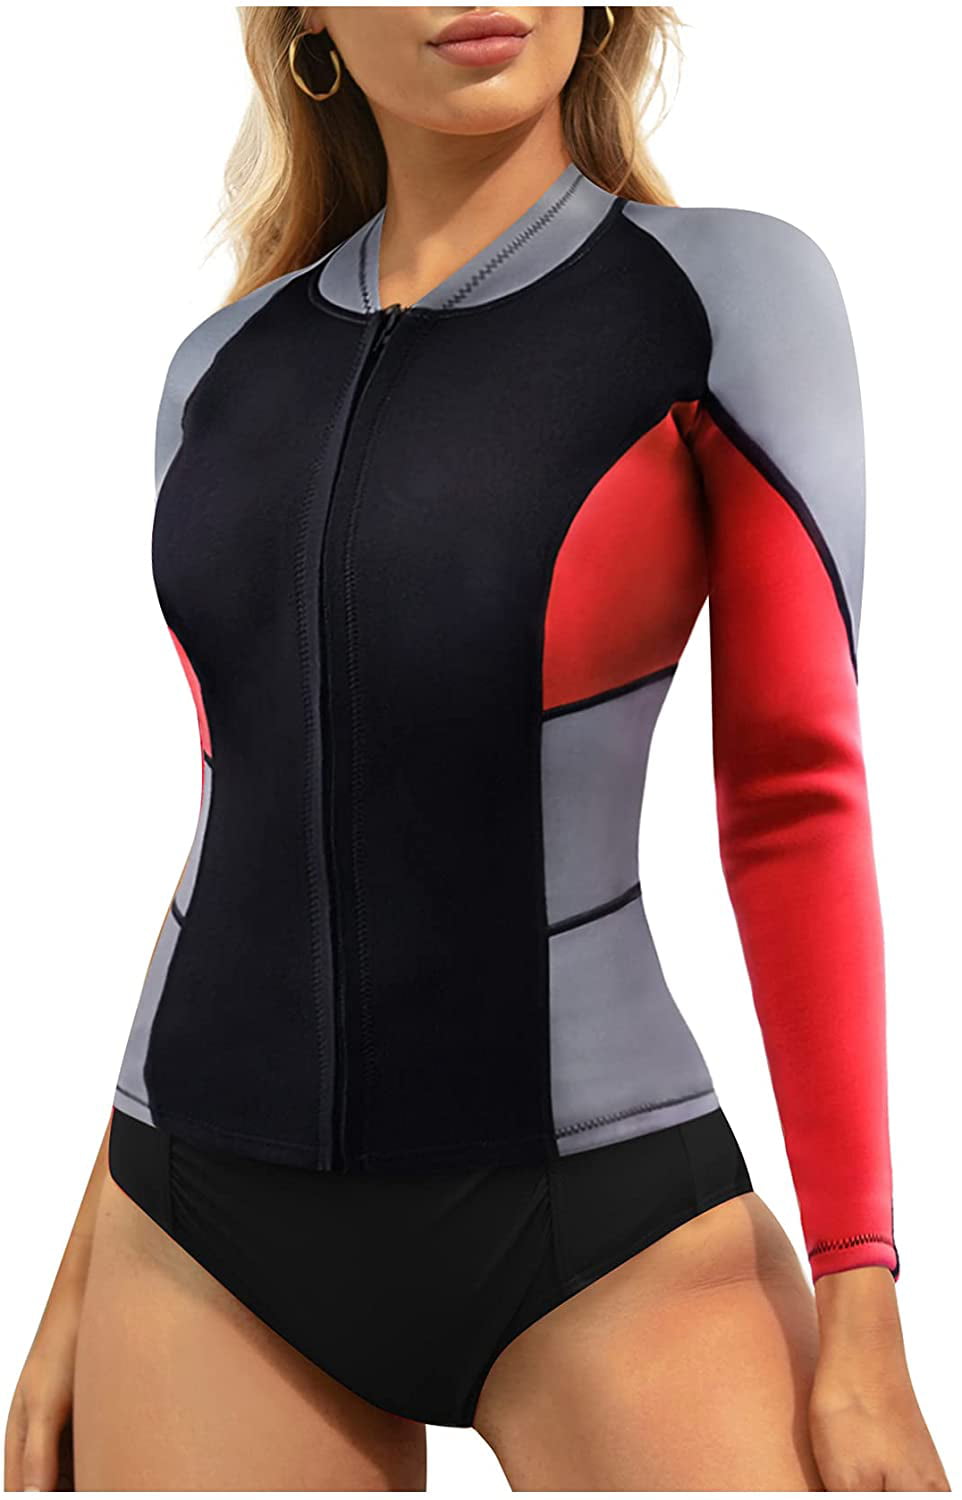 Details about   Wetsuit Swimwear Tops Warm Bodysuit Comfortable Long Sleeve Protection 